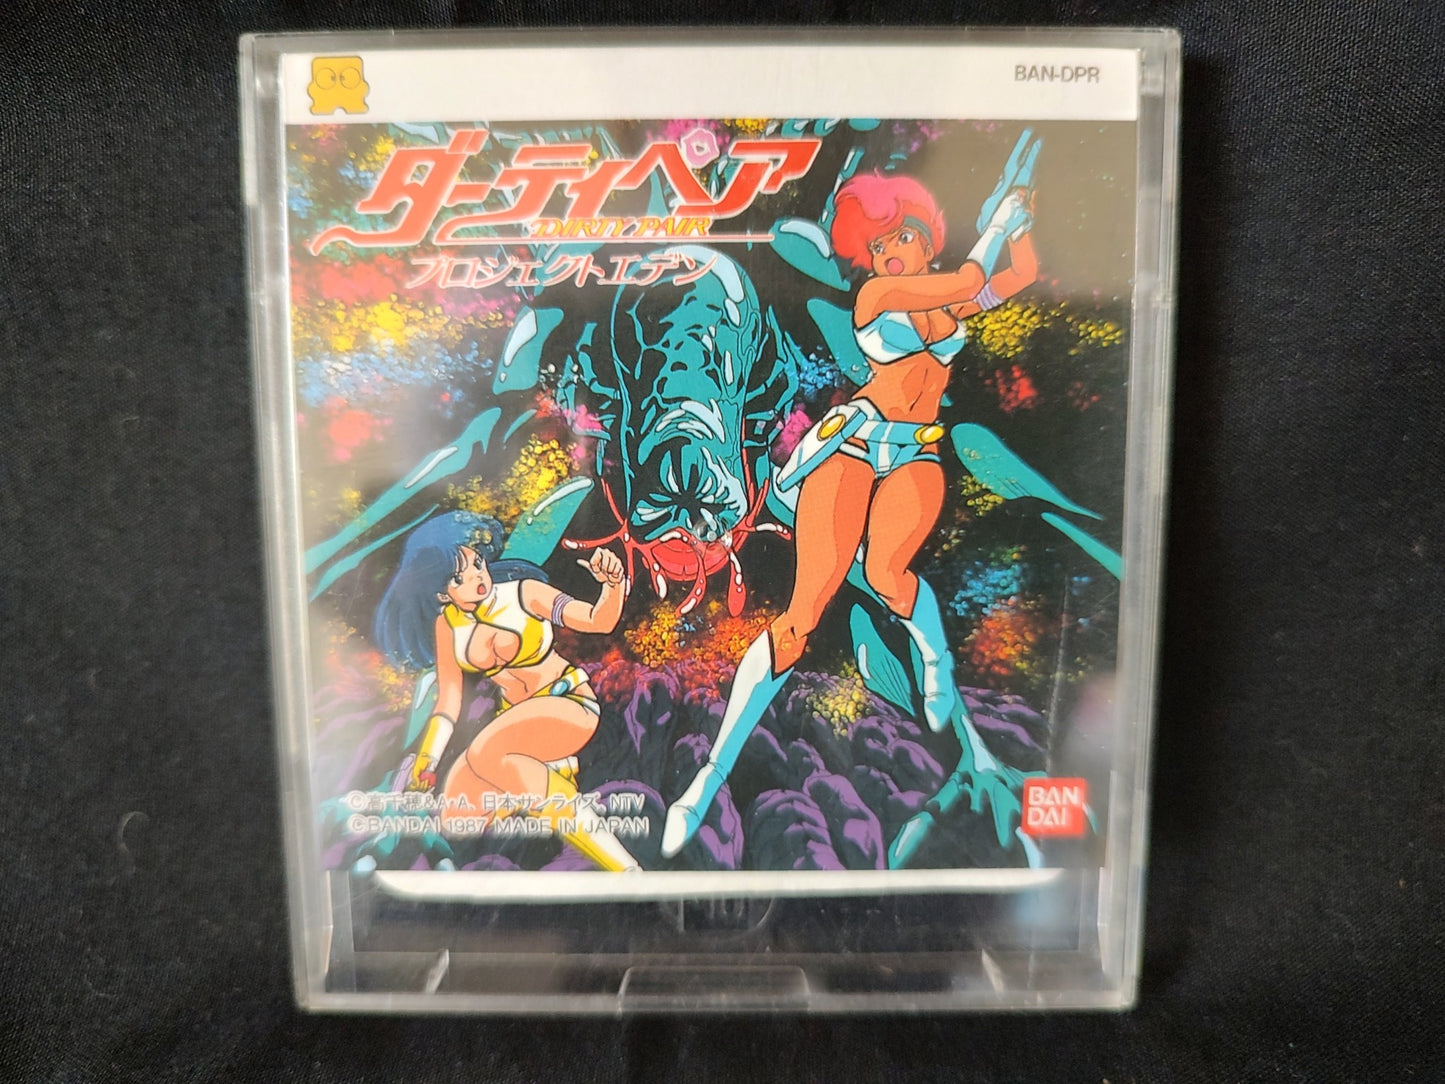 DIRTY PAIR FAMICOM (NES) Disk System, Game disk set, tested-f0515-